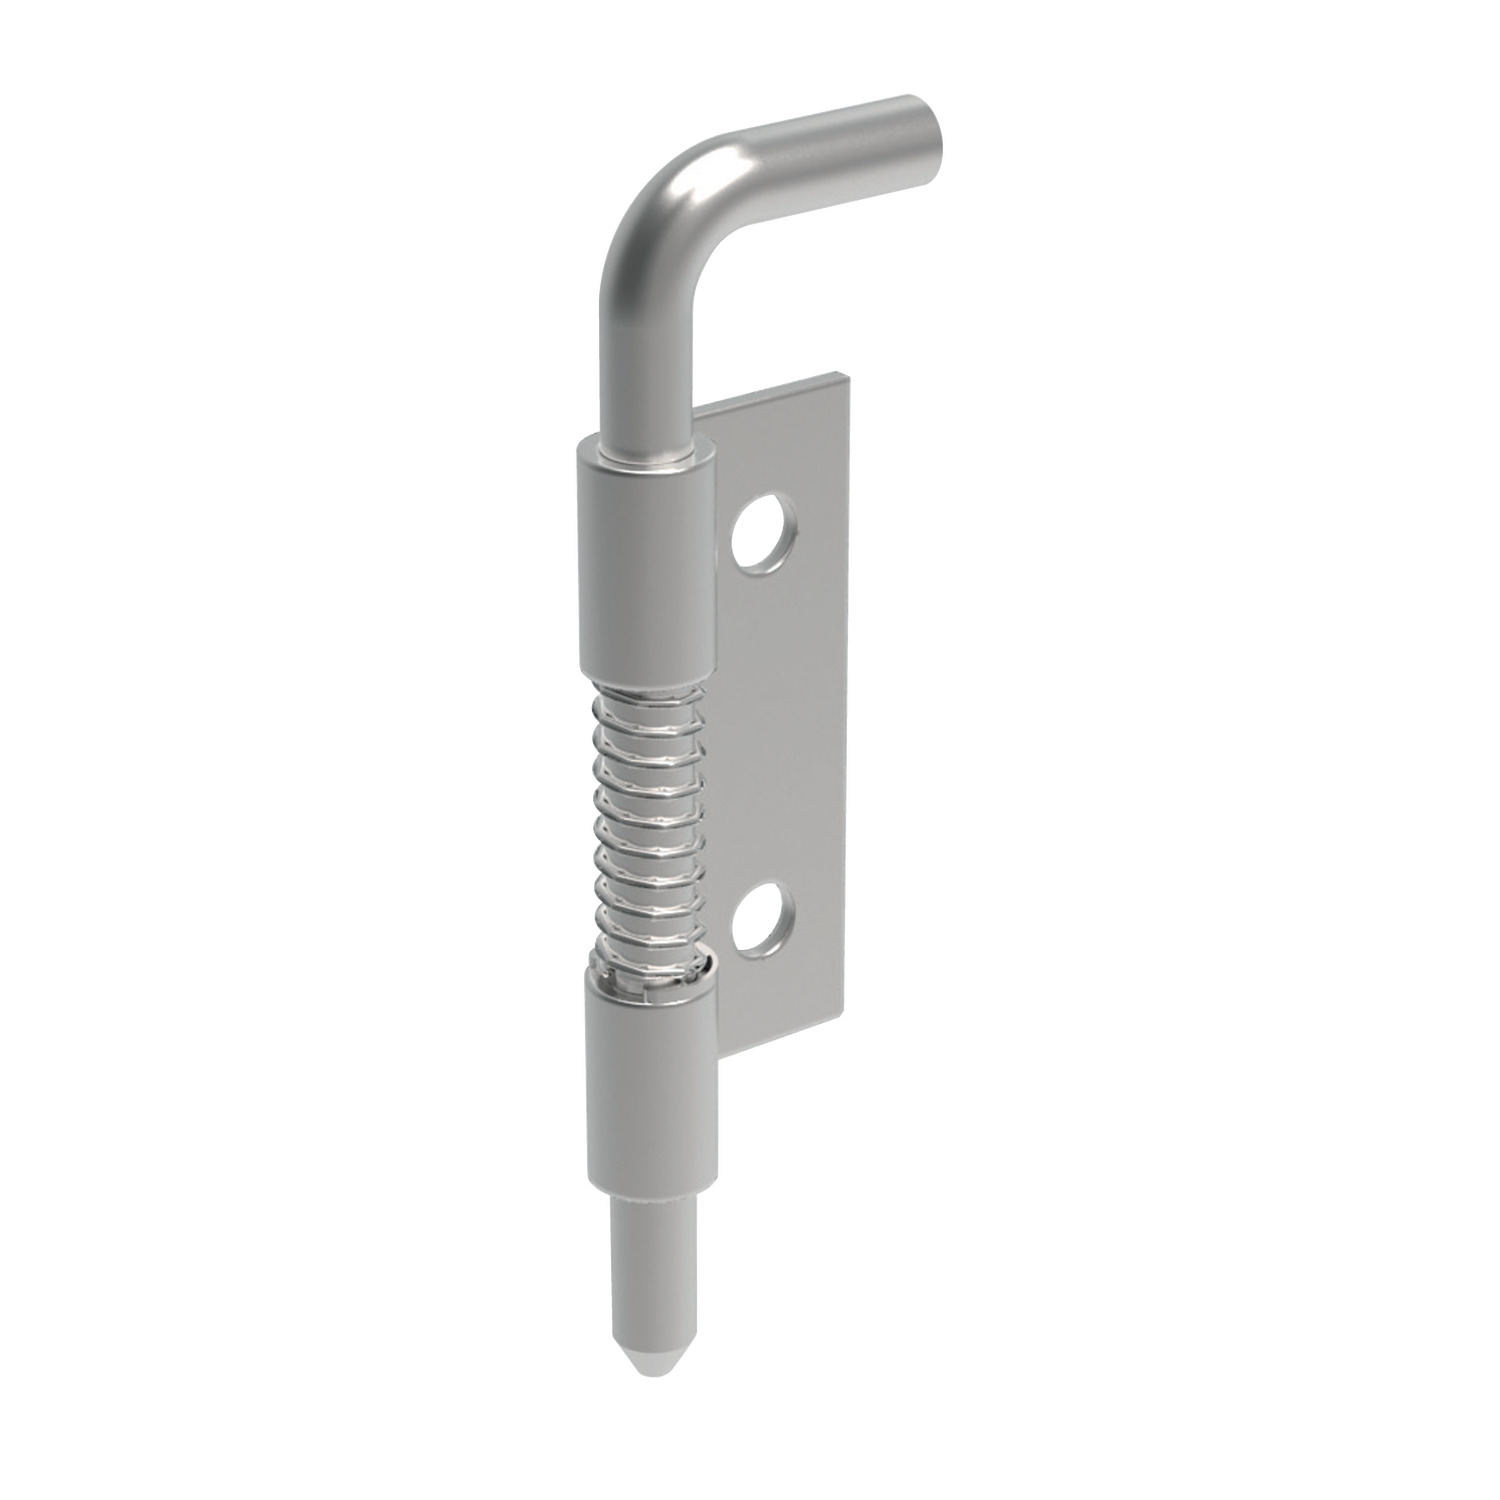 S2205.AW0163 End Mount Concealed Pivot Hinge Spring loaded - screw or weld-on mount - steel. Right Hand - M5.